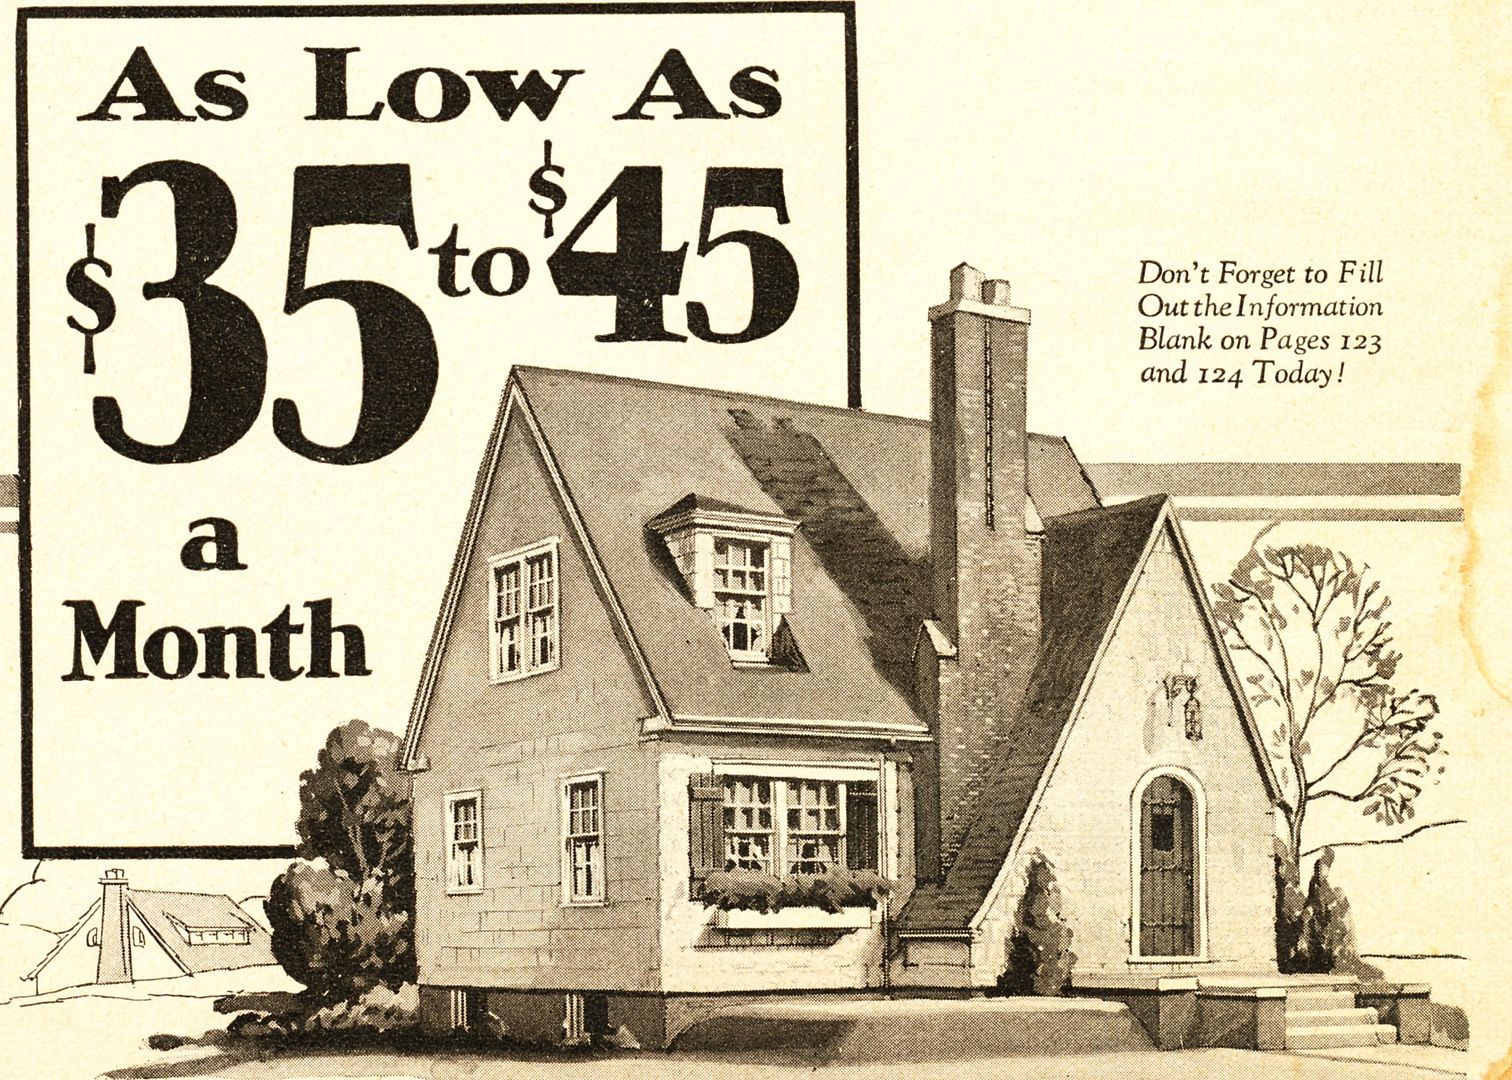 The Sears Willard was the house featured in a promotion showcasing affordable monthly payments. 